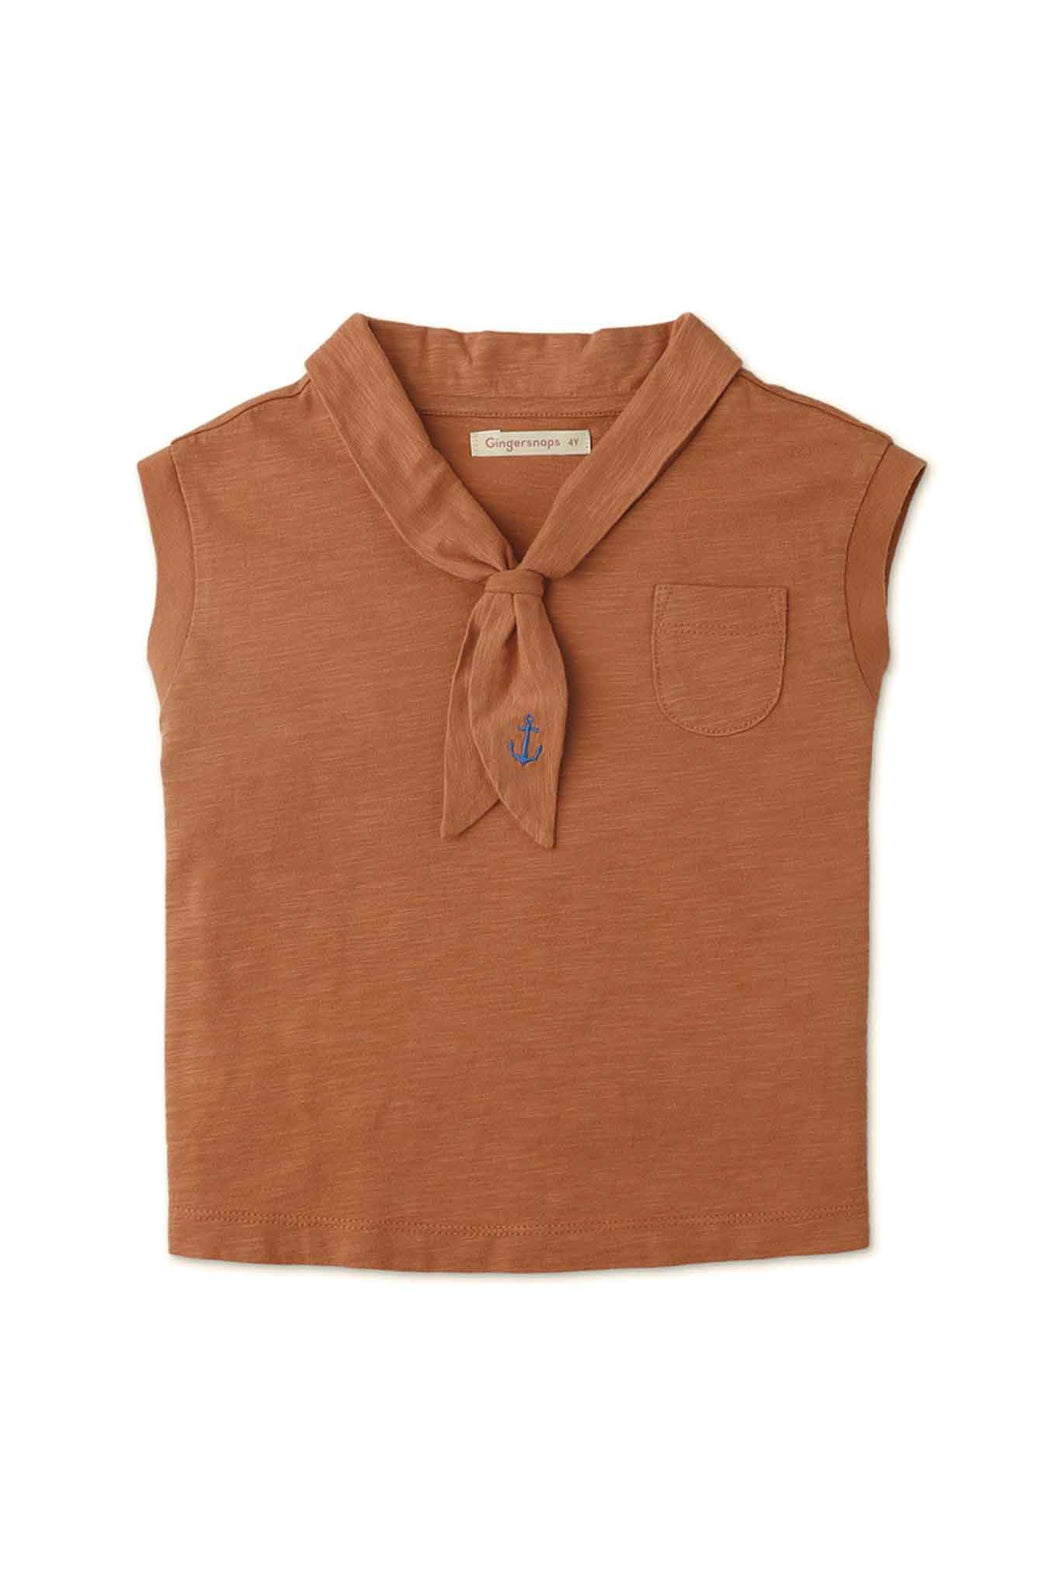 Gingersnaps Plain Color Collared Sleeveless Top with Pocket